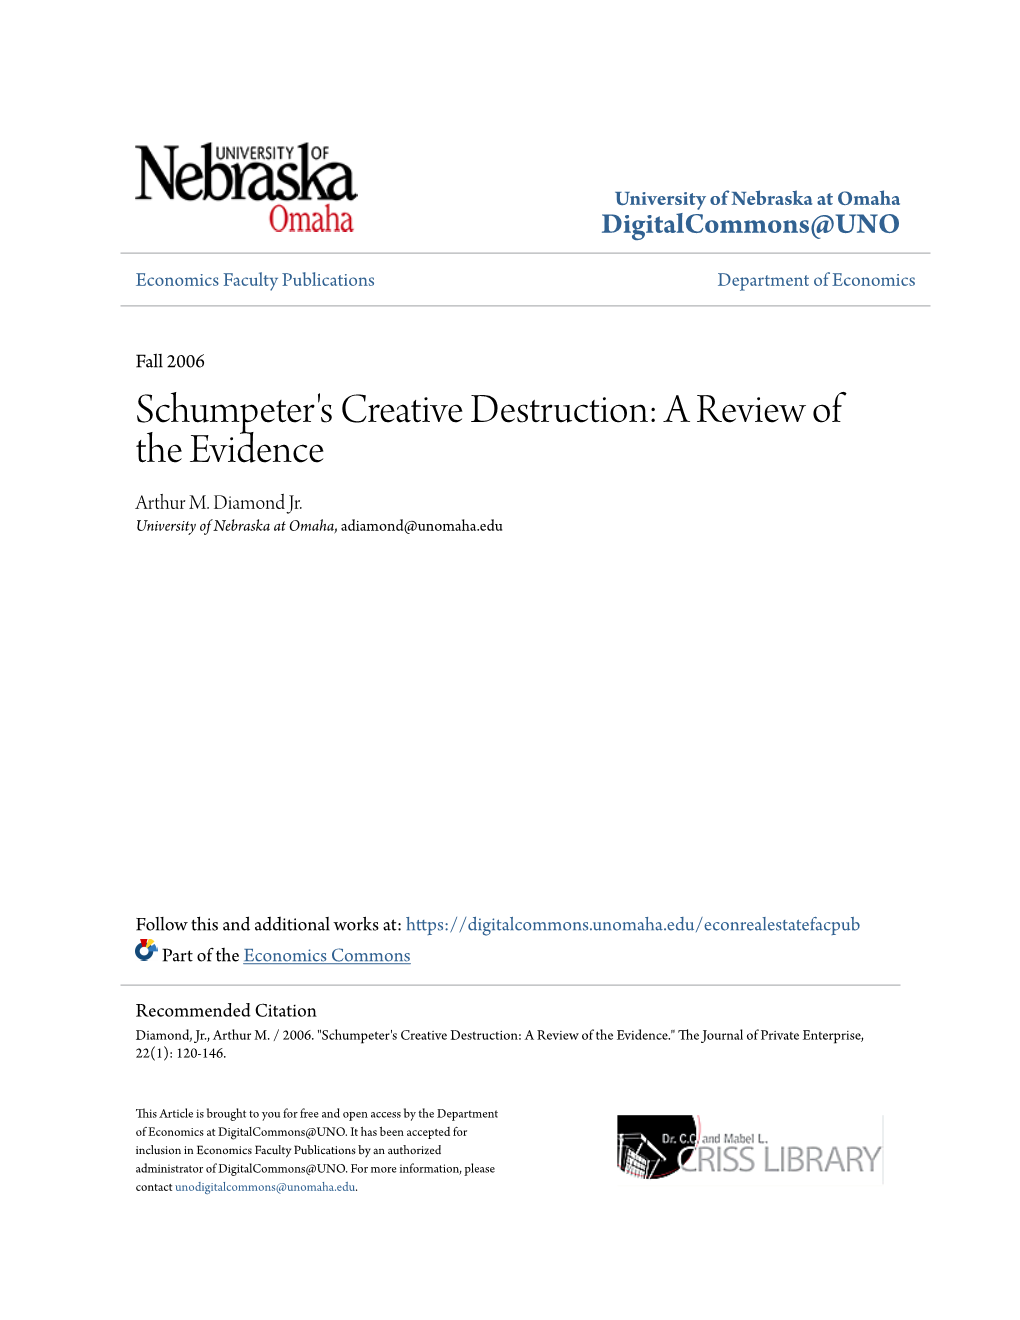 Schumpeter's Creative Destruction: a Review of the Evidence Arthur M